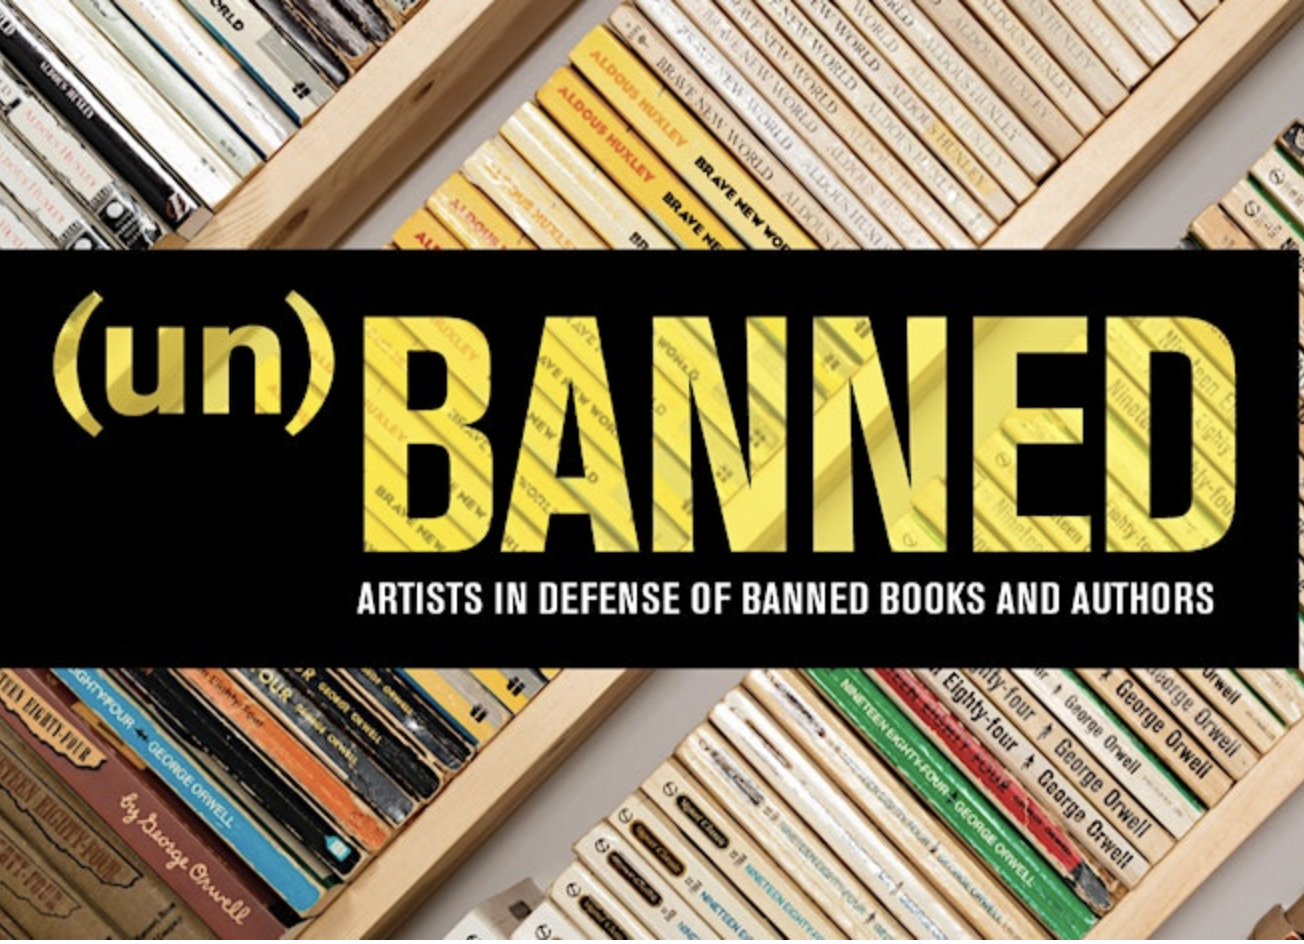 October 14: (un)Banned at Arion Press Opening Reception